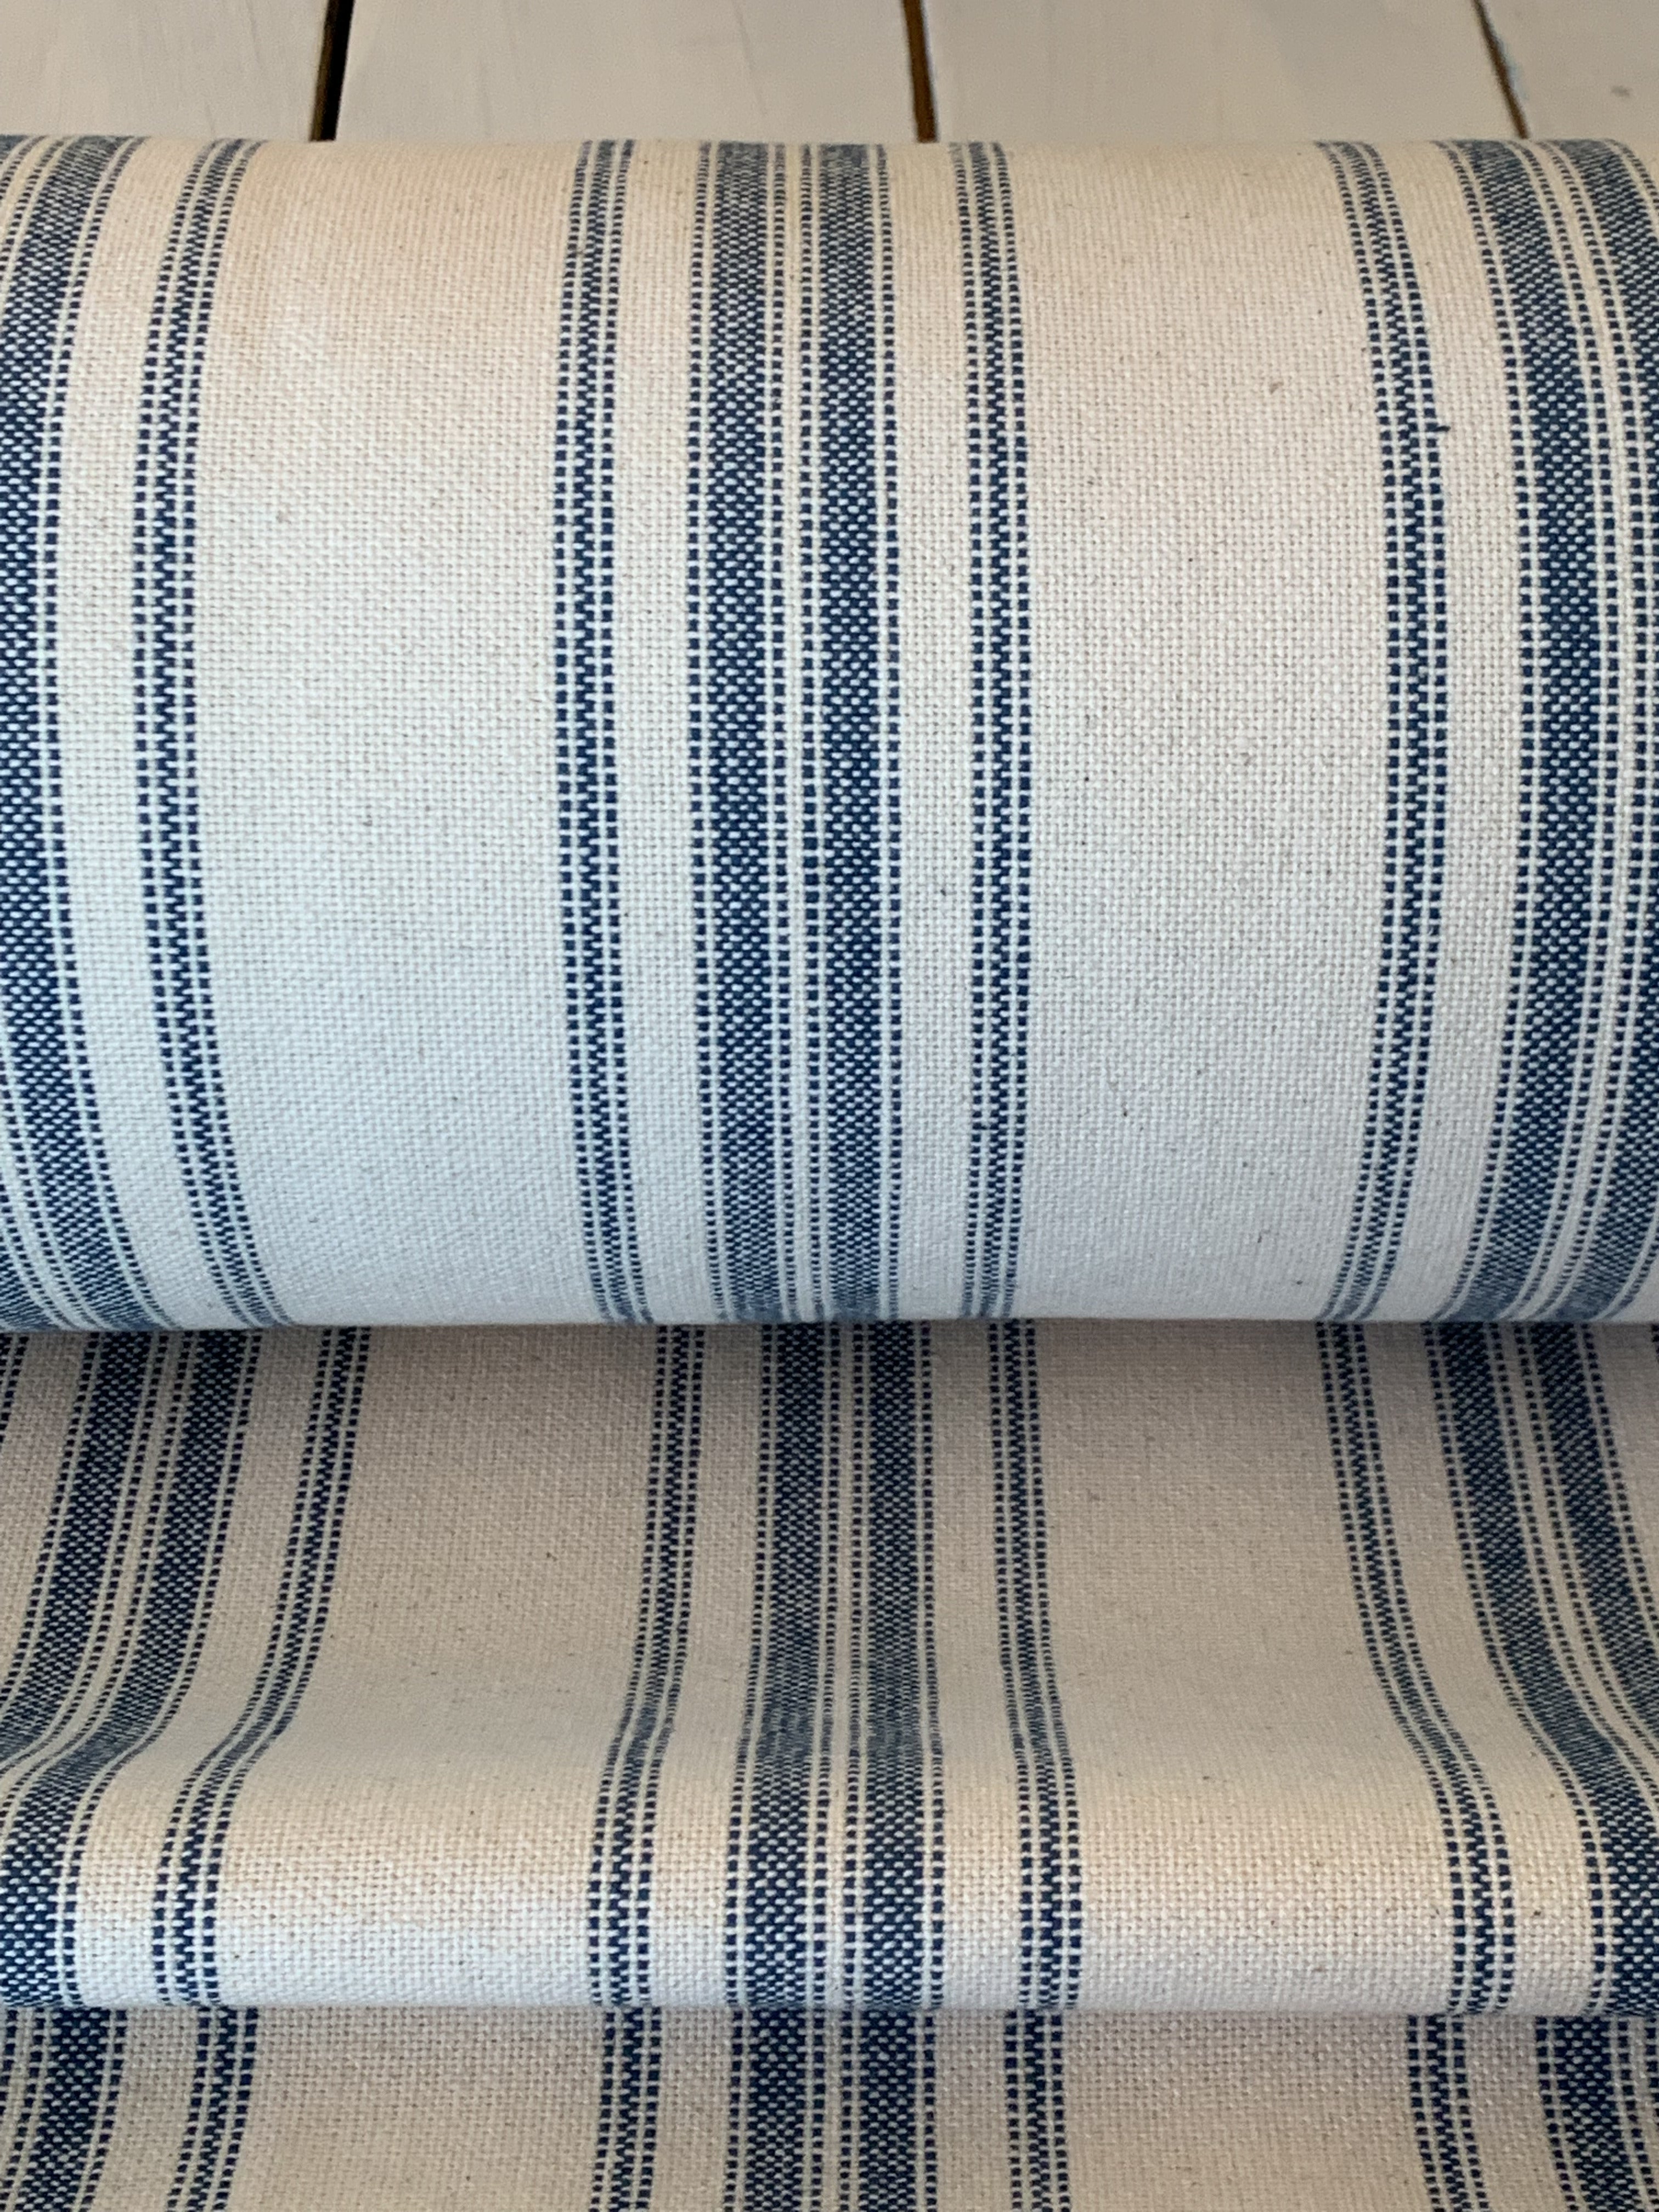 Grain Sack Fabric - Feed Sack Fabric - Ticking Fabric - Our EXCLUSIVE  Fabric - Farmhouse Style - Blue Stripes on Off-White - 63Wide